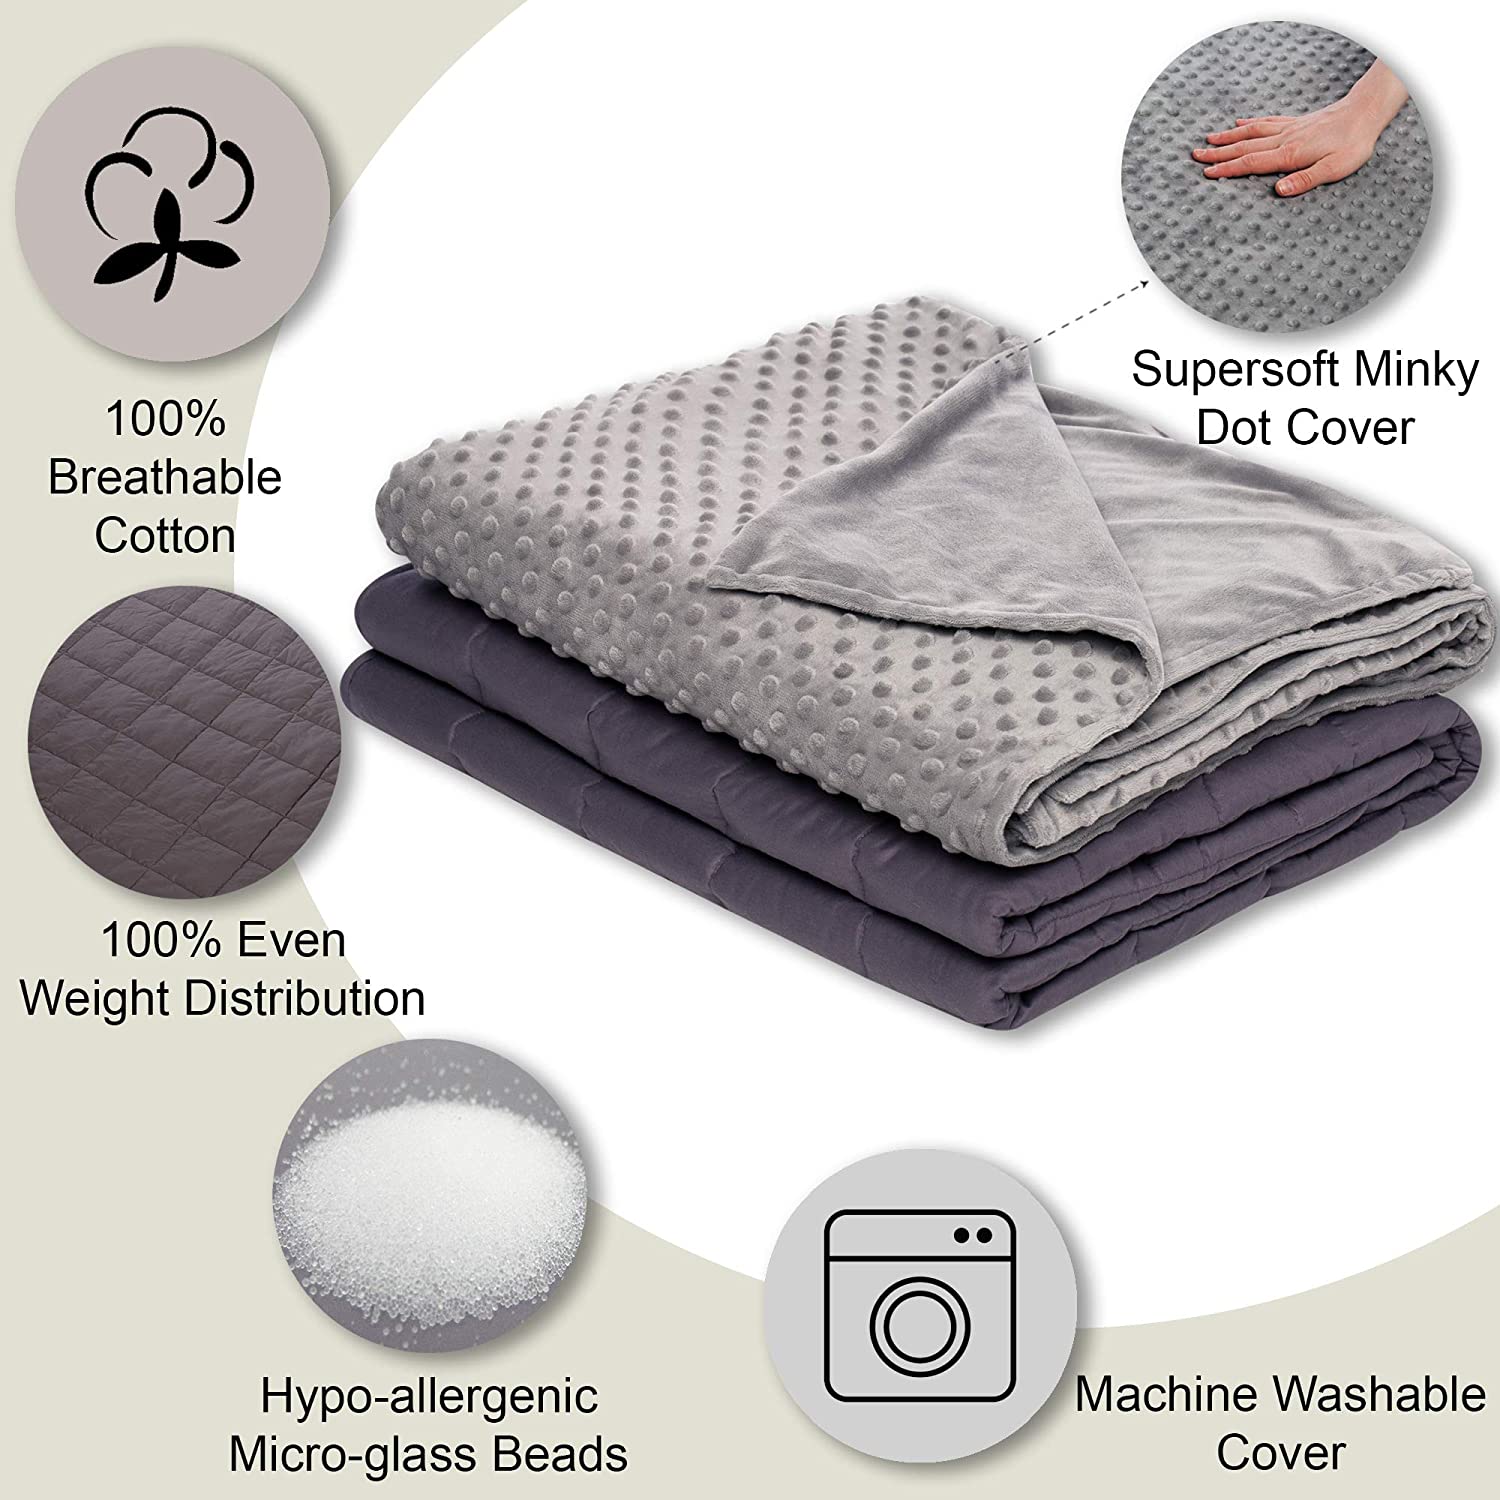 Super Soft 15 lbs Weighted Blanket with Removable Cover - 48 x 72 inch Comfort Weighted Blankets - Adult Heavy Blanket Twin Size Grey - Hazli Collection 